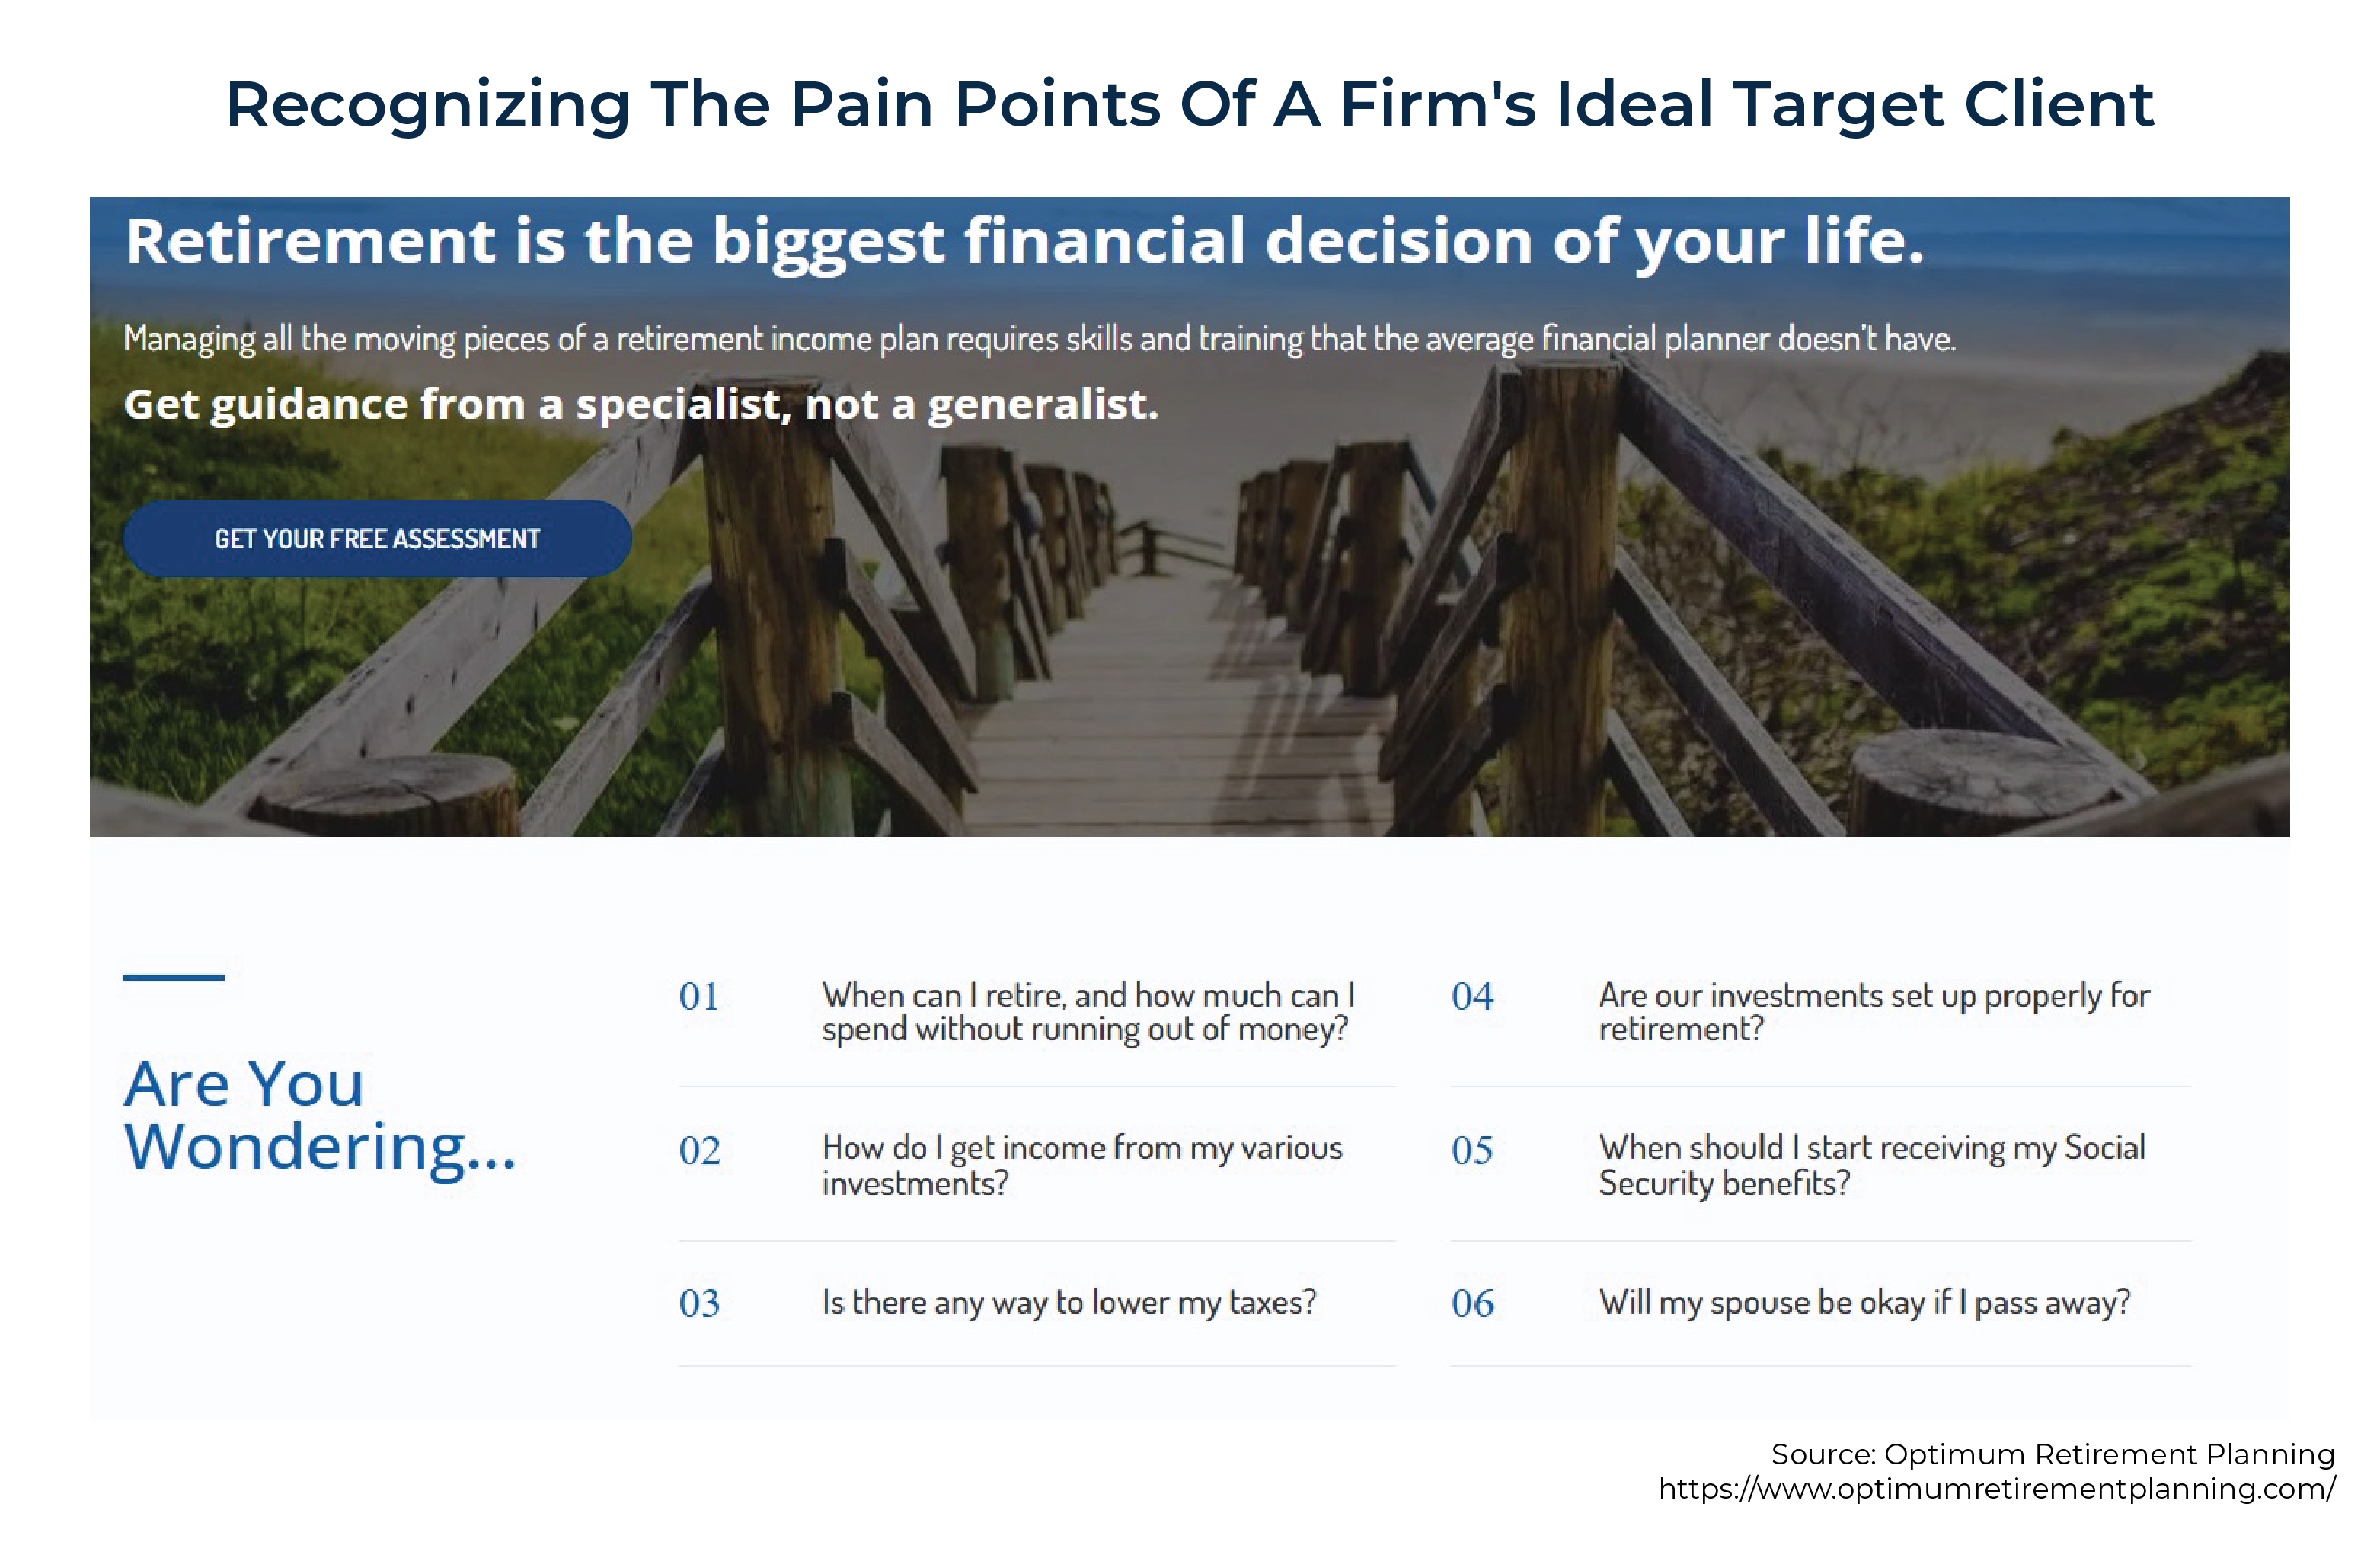 Recognizing The Pain Points Of A Firms Ideal Target Client